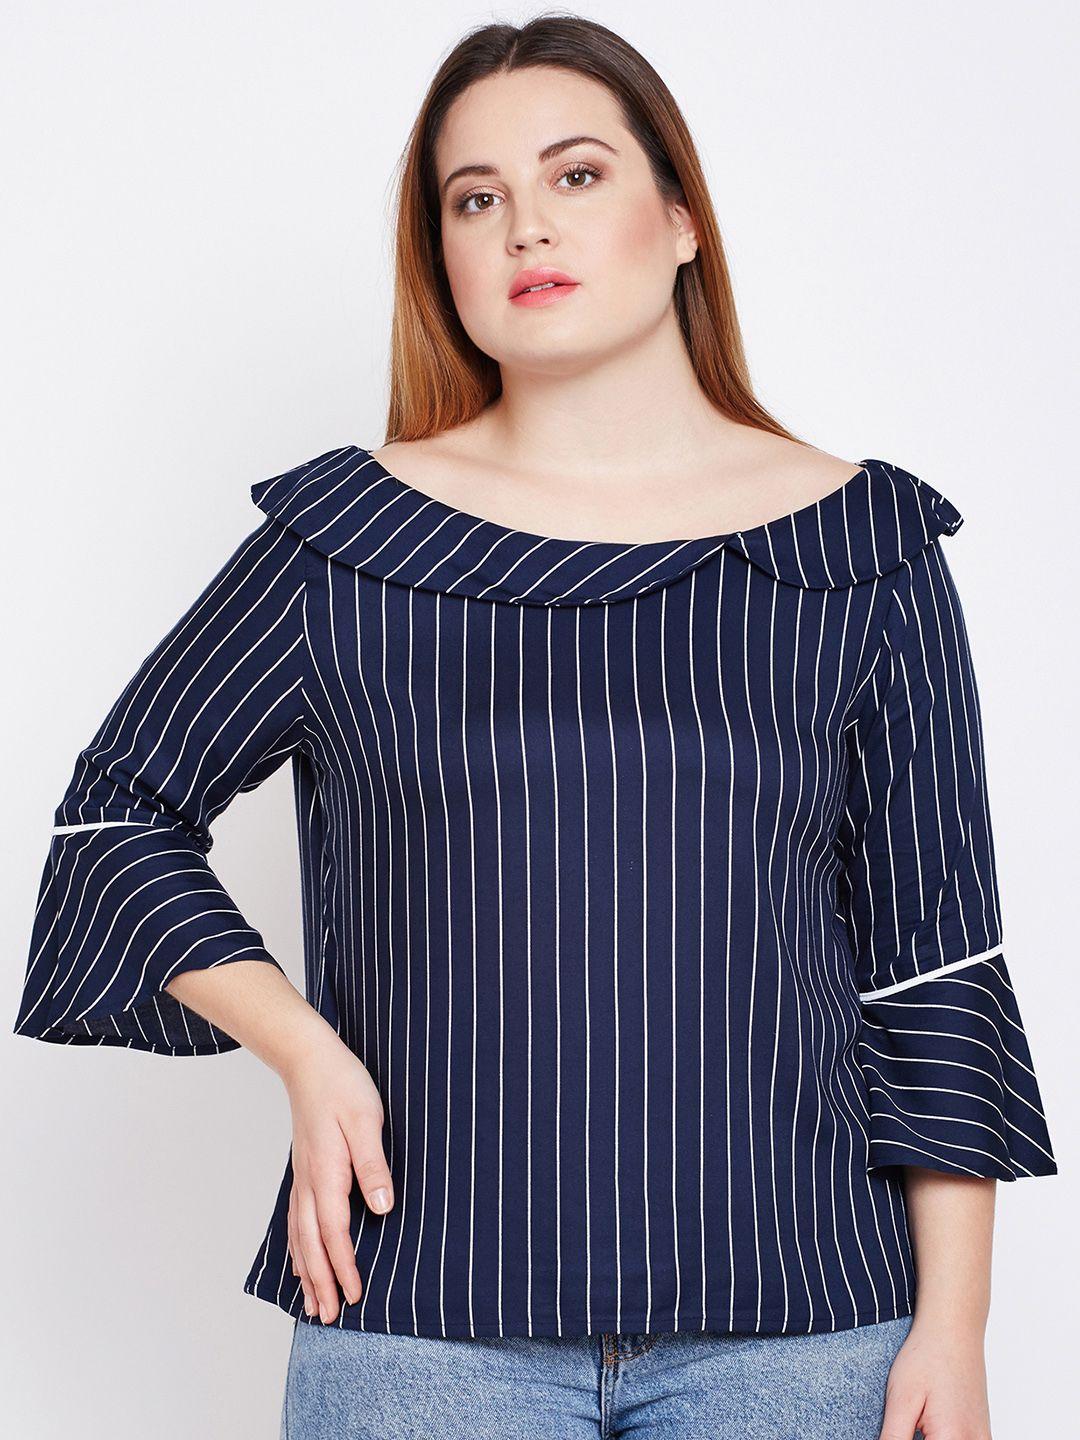 style quotient women navy blue striped top